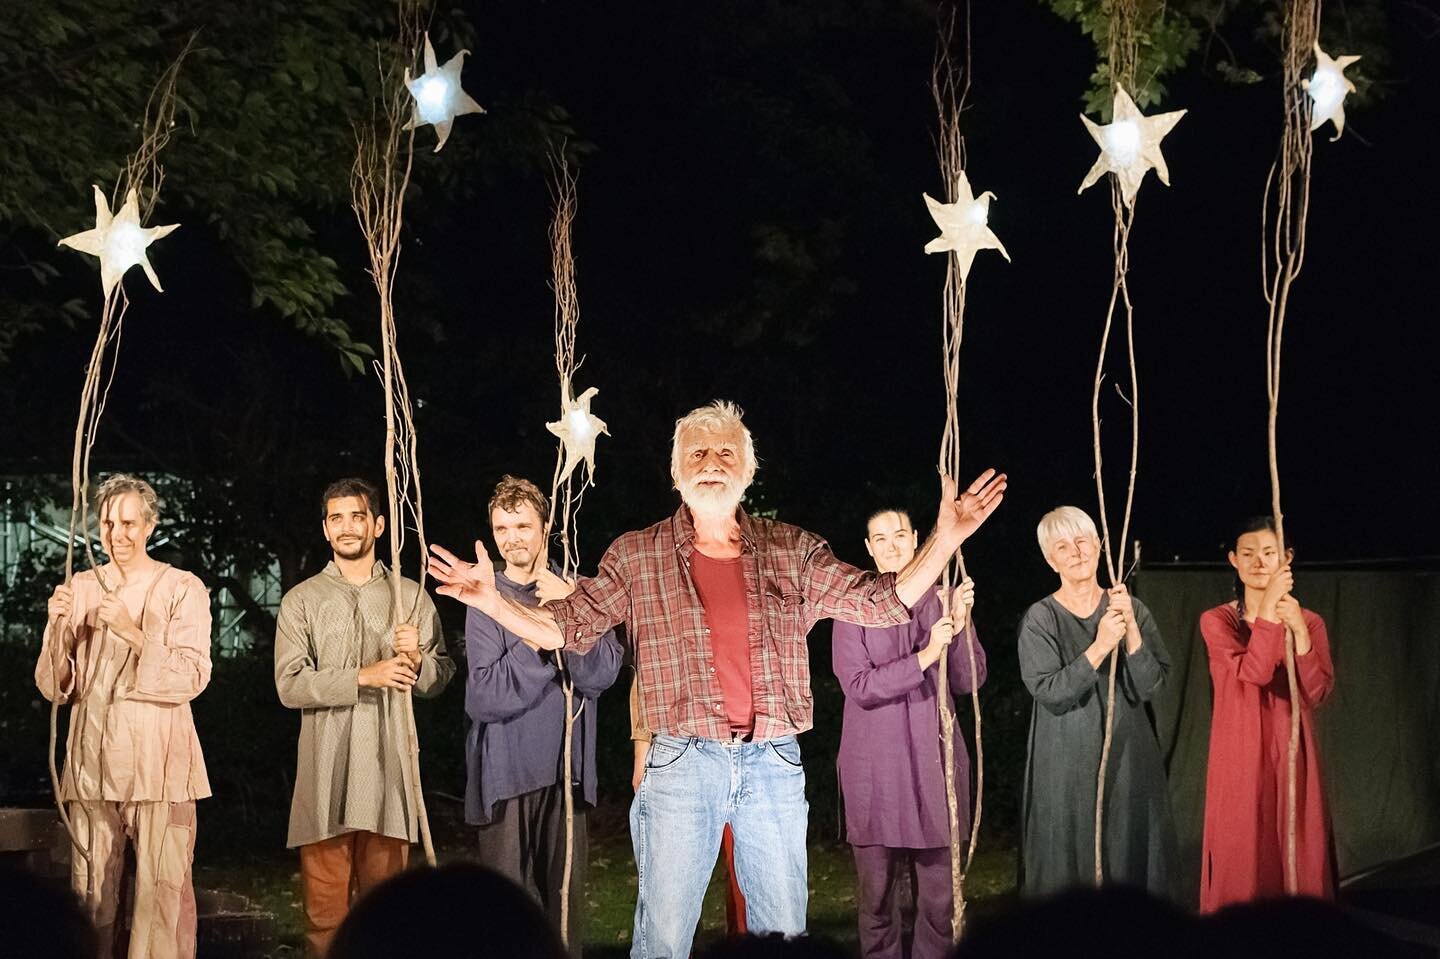 Ralph Lee making magic with the Mettawee River Theatre Company. 

Every summer they presented a different world folktale or myth. Creative, humorous, charming, captivating. Small scale, up close, and some of the greatest theater I&rsquo;ve ever been 